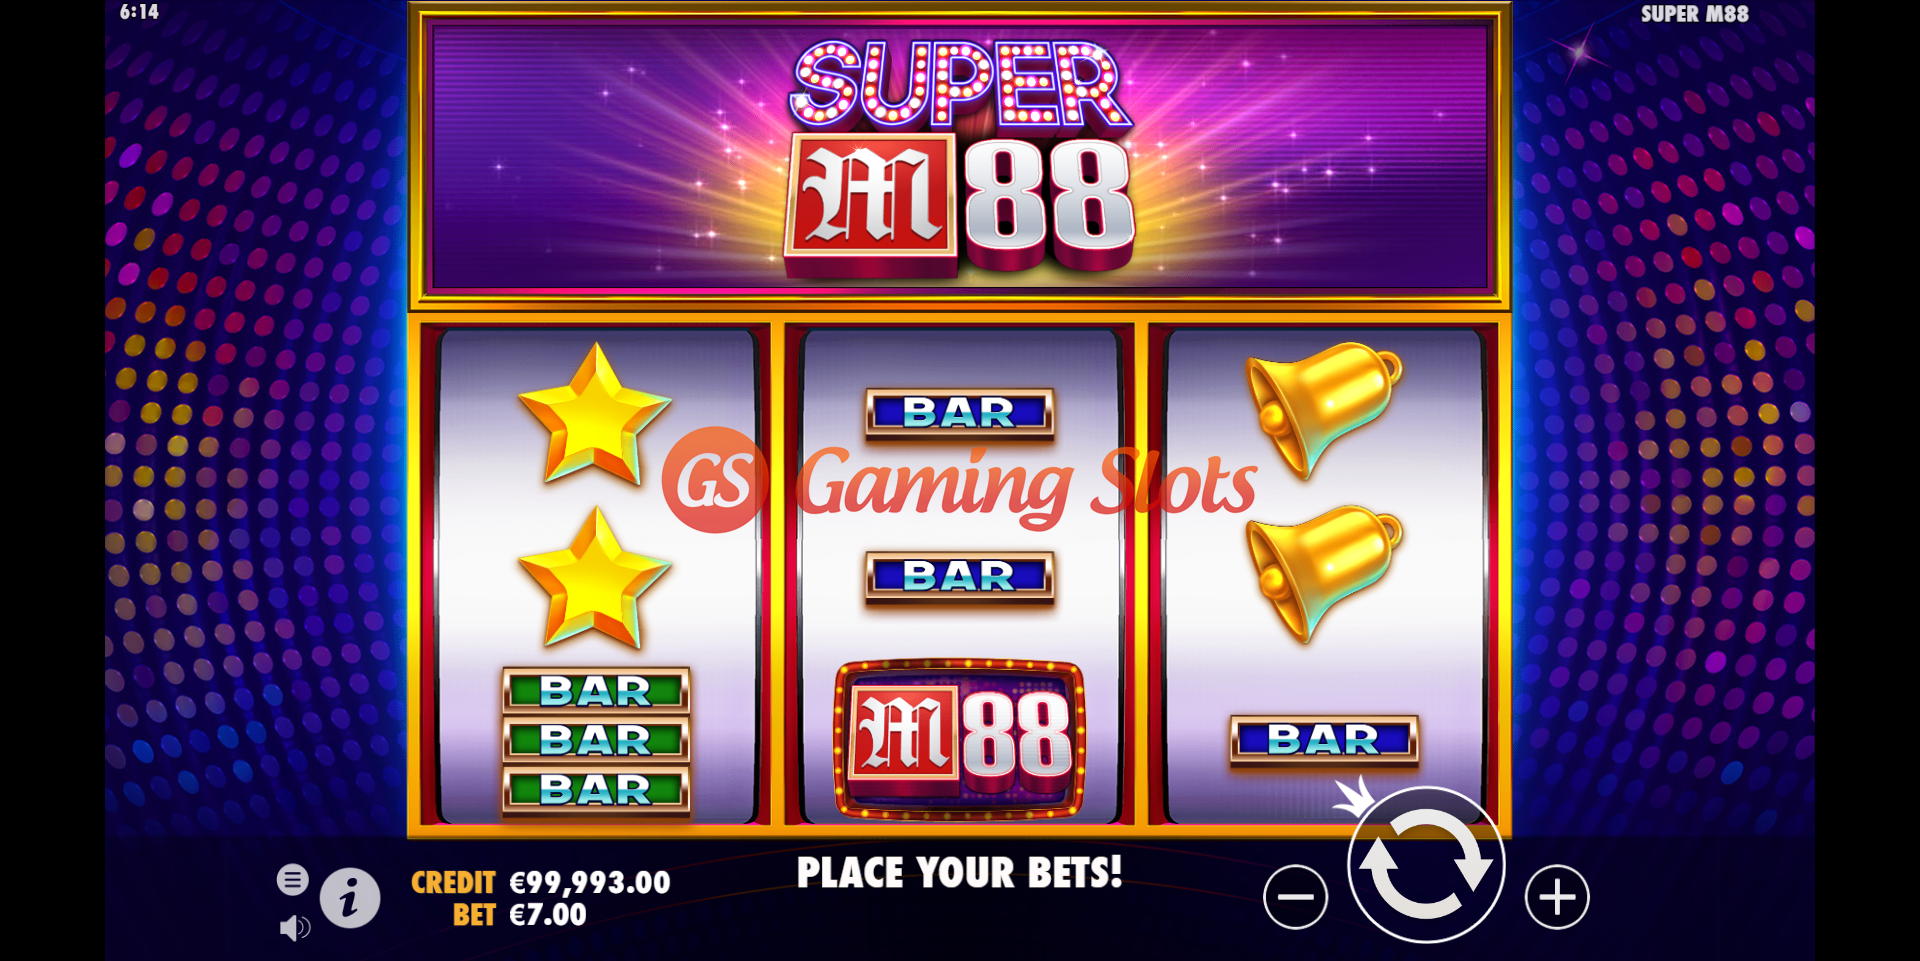 Base Game for Super M88 slot from Pragmatic Play